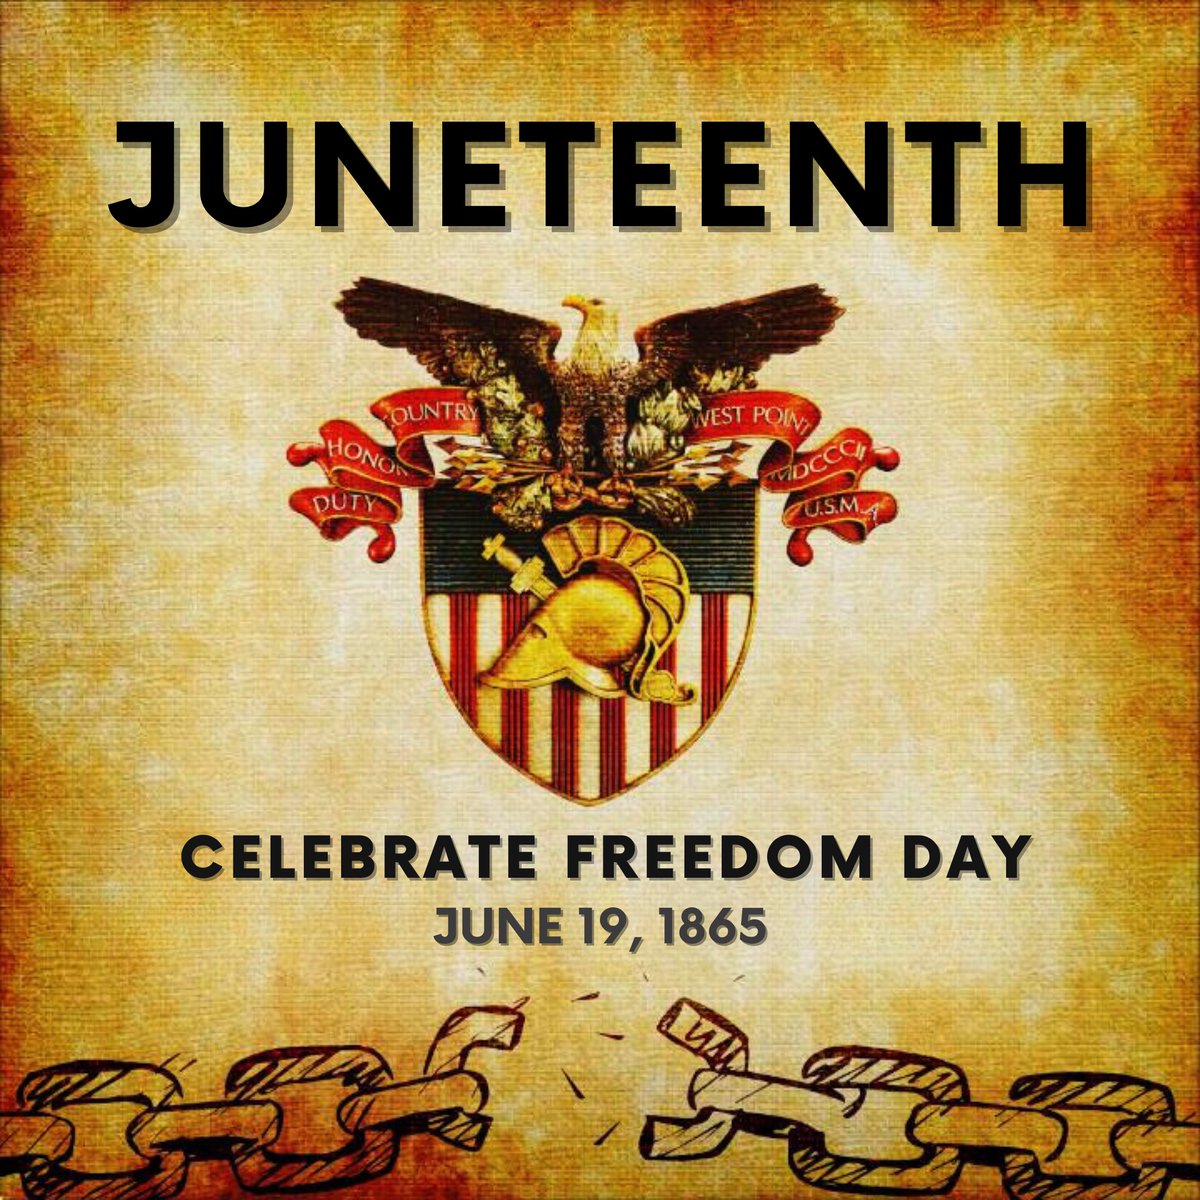 Juneteenth - A Day of Recognition, Restoration, and Celebration of Freedom! 🇺🇸

#Juneteenth | #MakingADifference | #ArmyHistory #DutyHonorCountry | #Possibilities 

@USArmy | @ArmyHistory | @GoArmy | @SecArmy